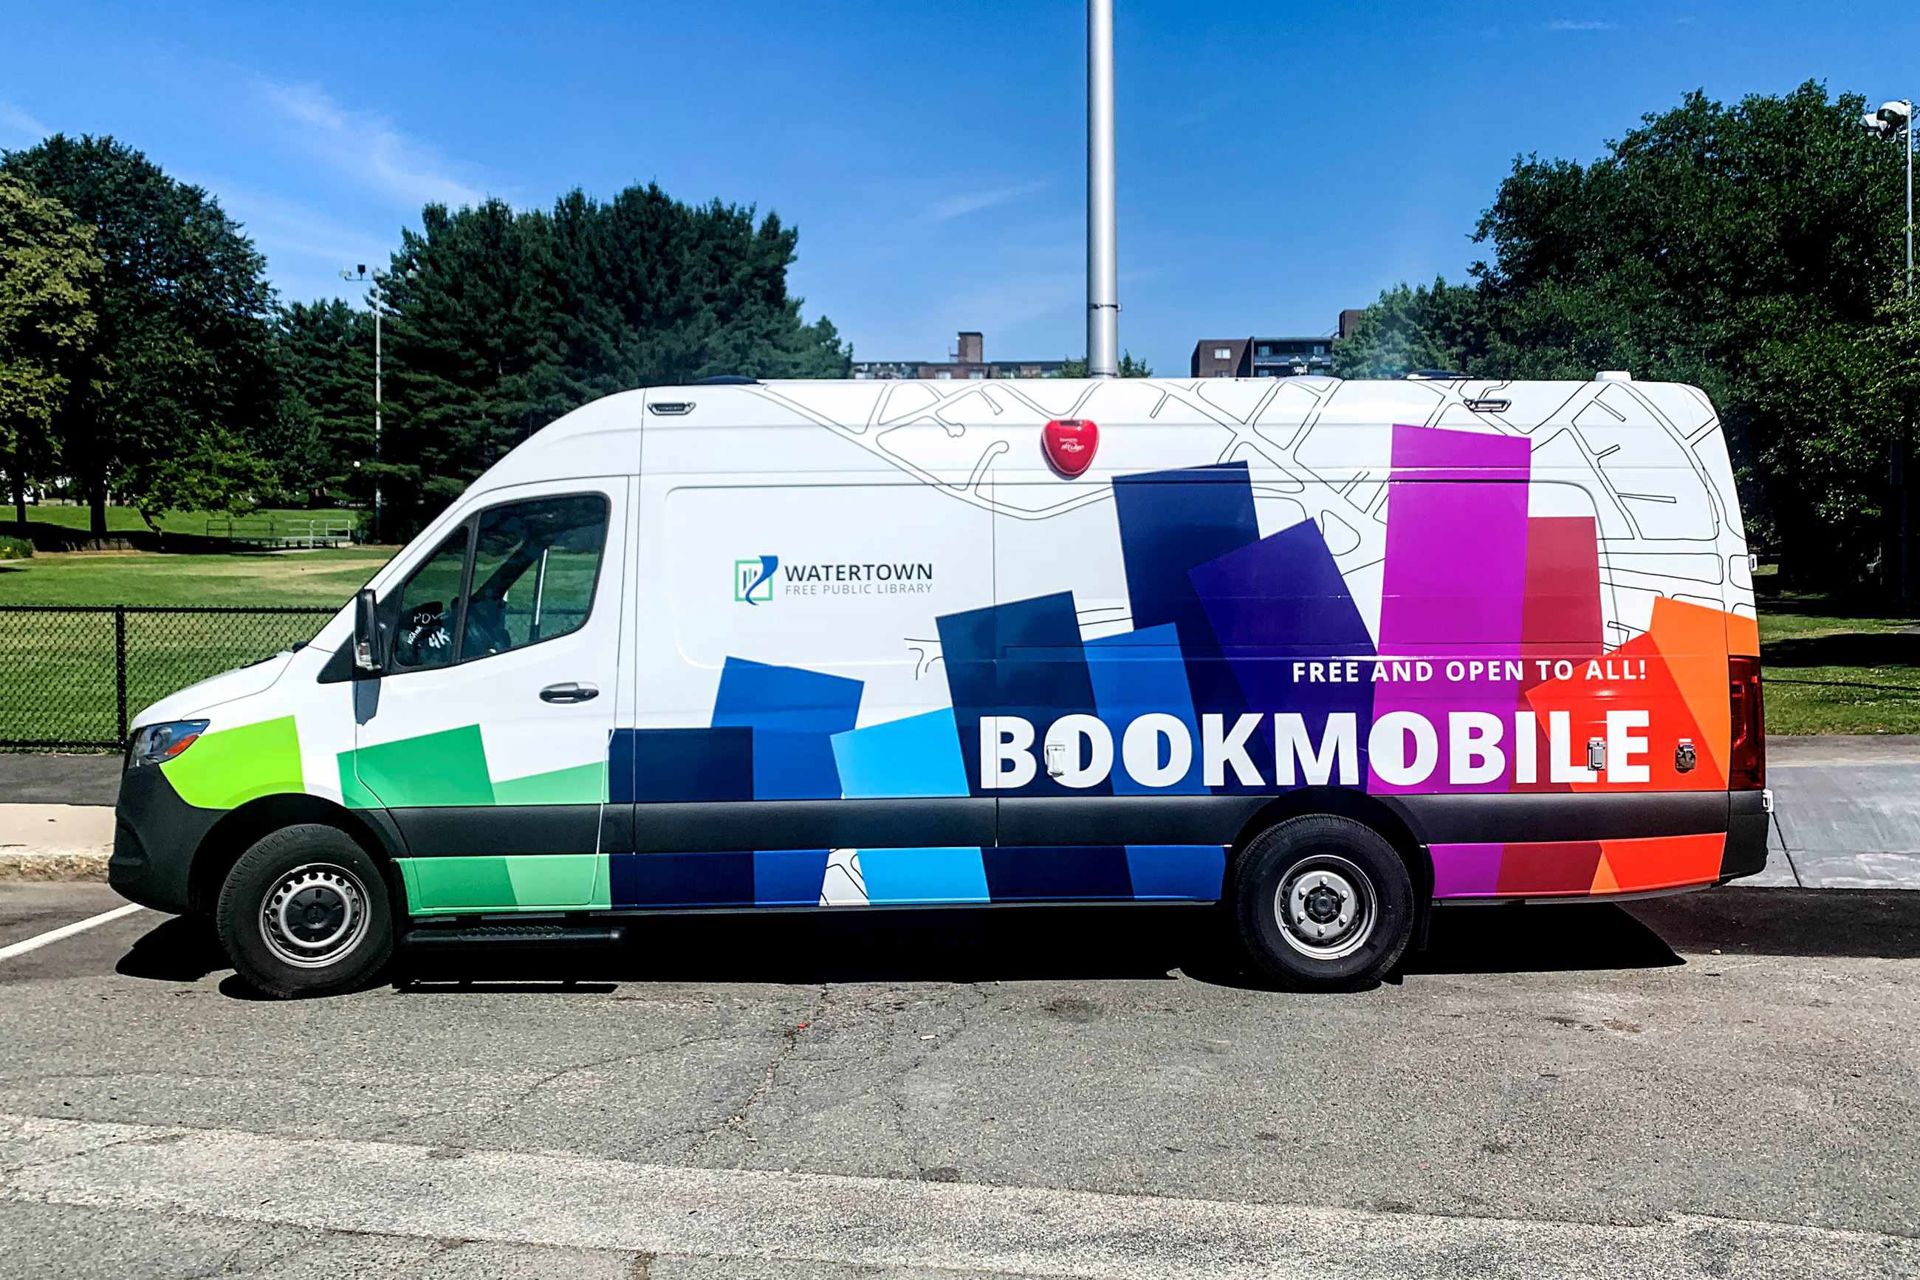 The Watertown Free Public Library bookmobile.